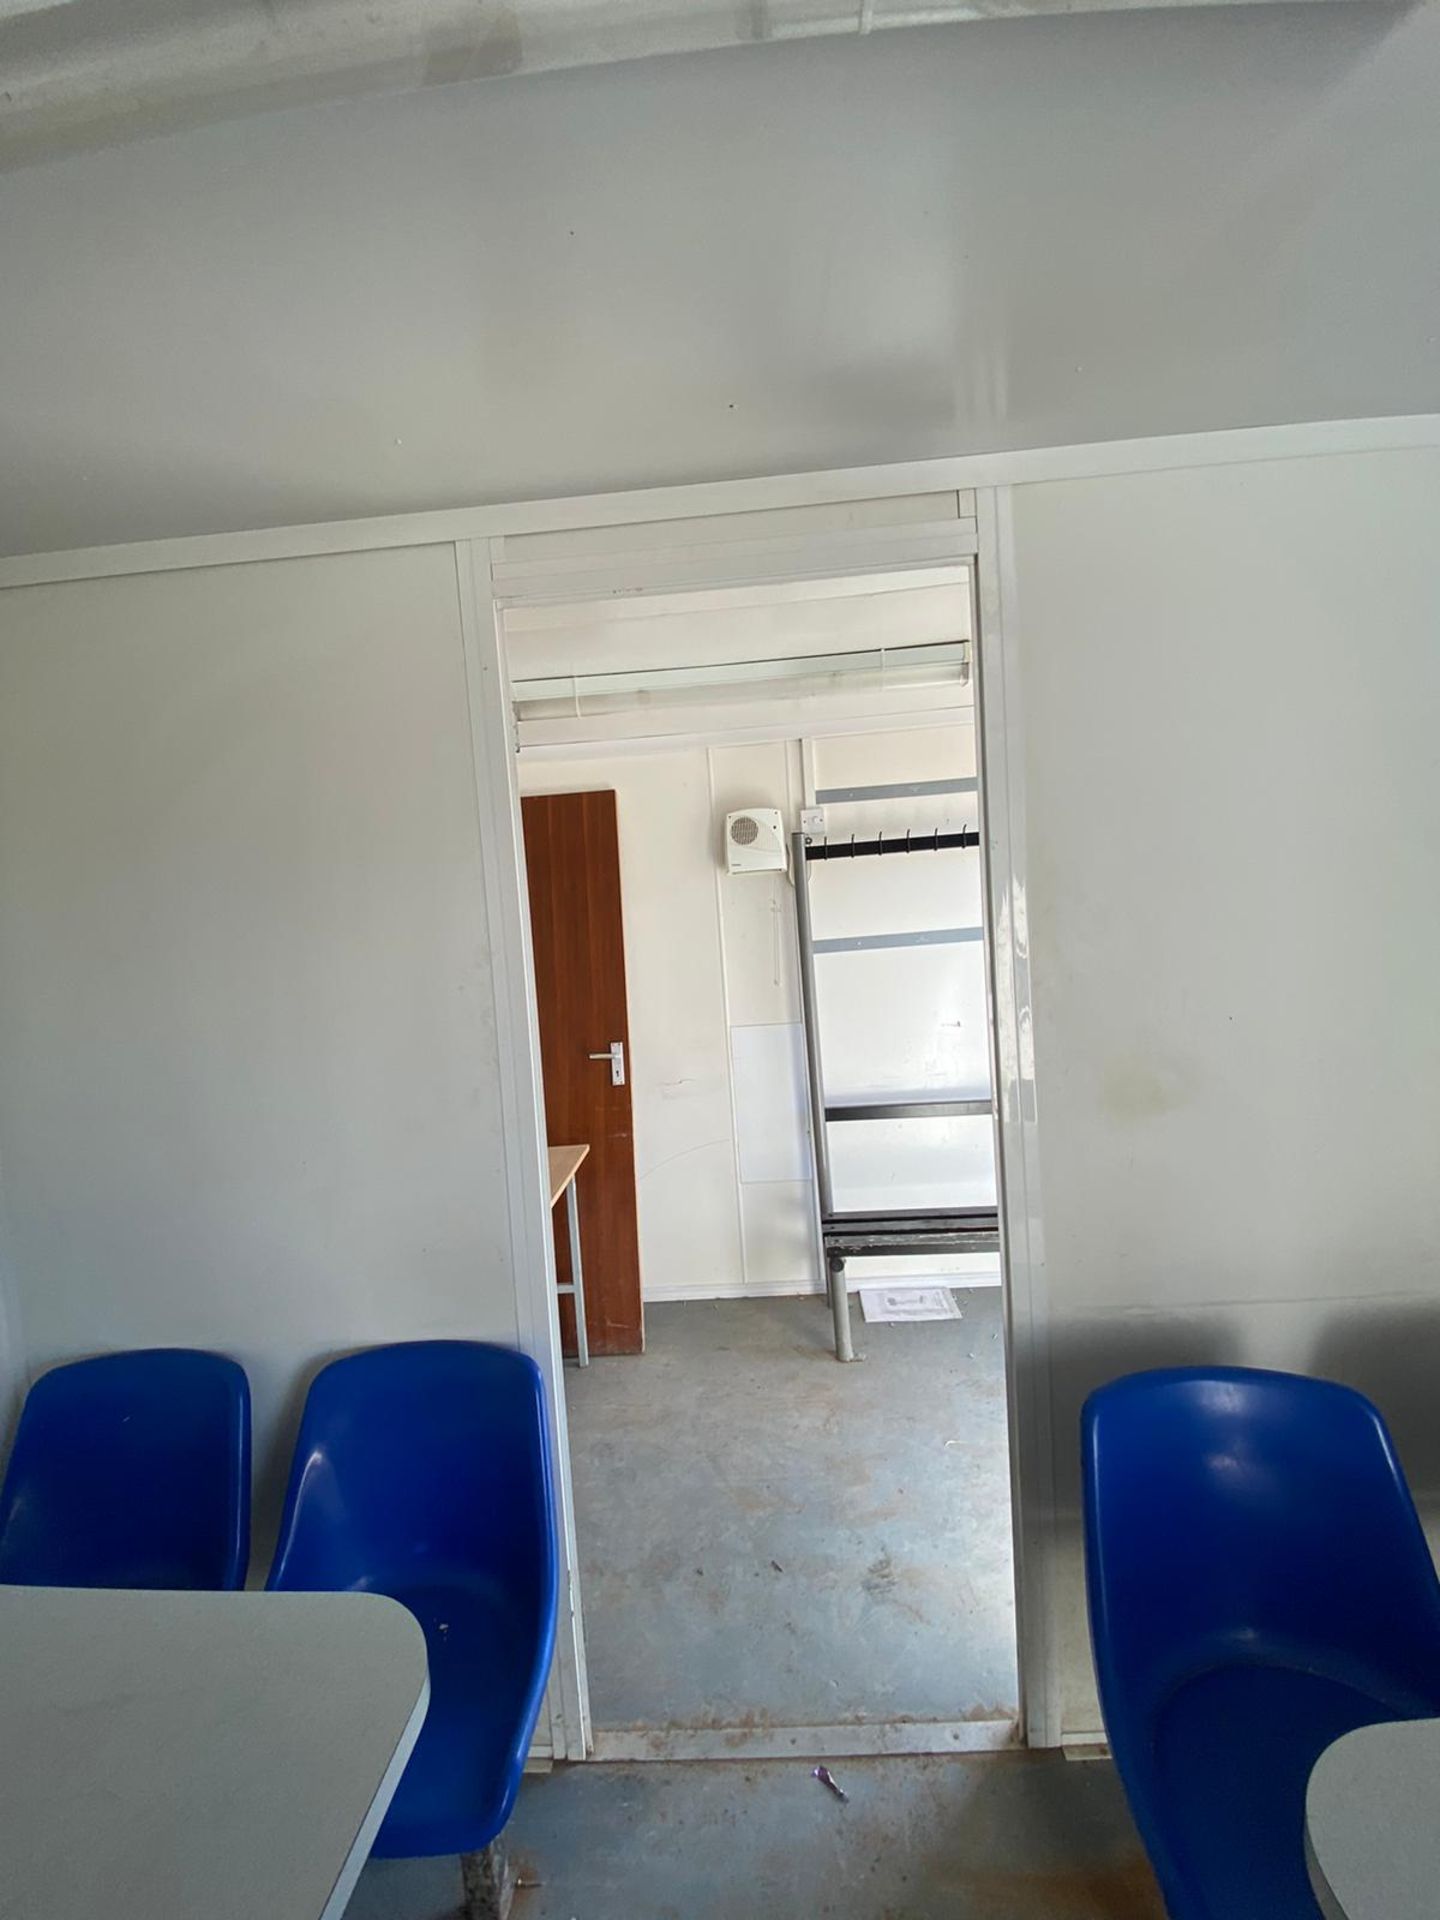 40ft x 10ft office, kitchen and toilet container cabin - Image 12 of 22